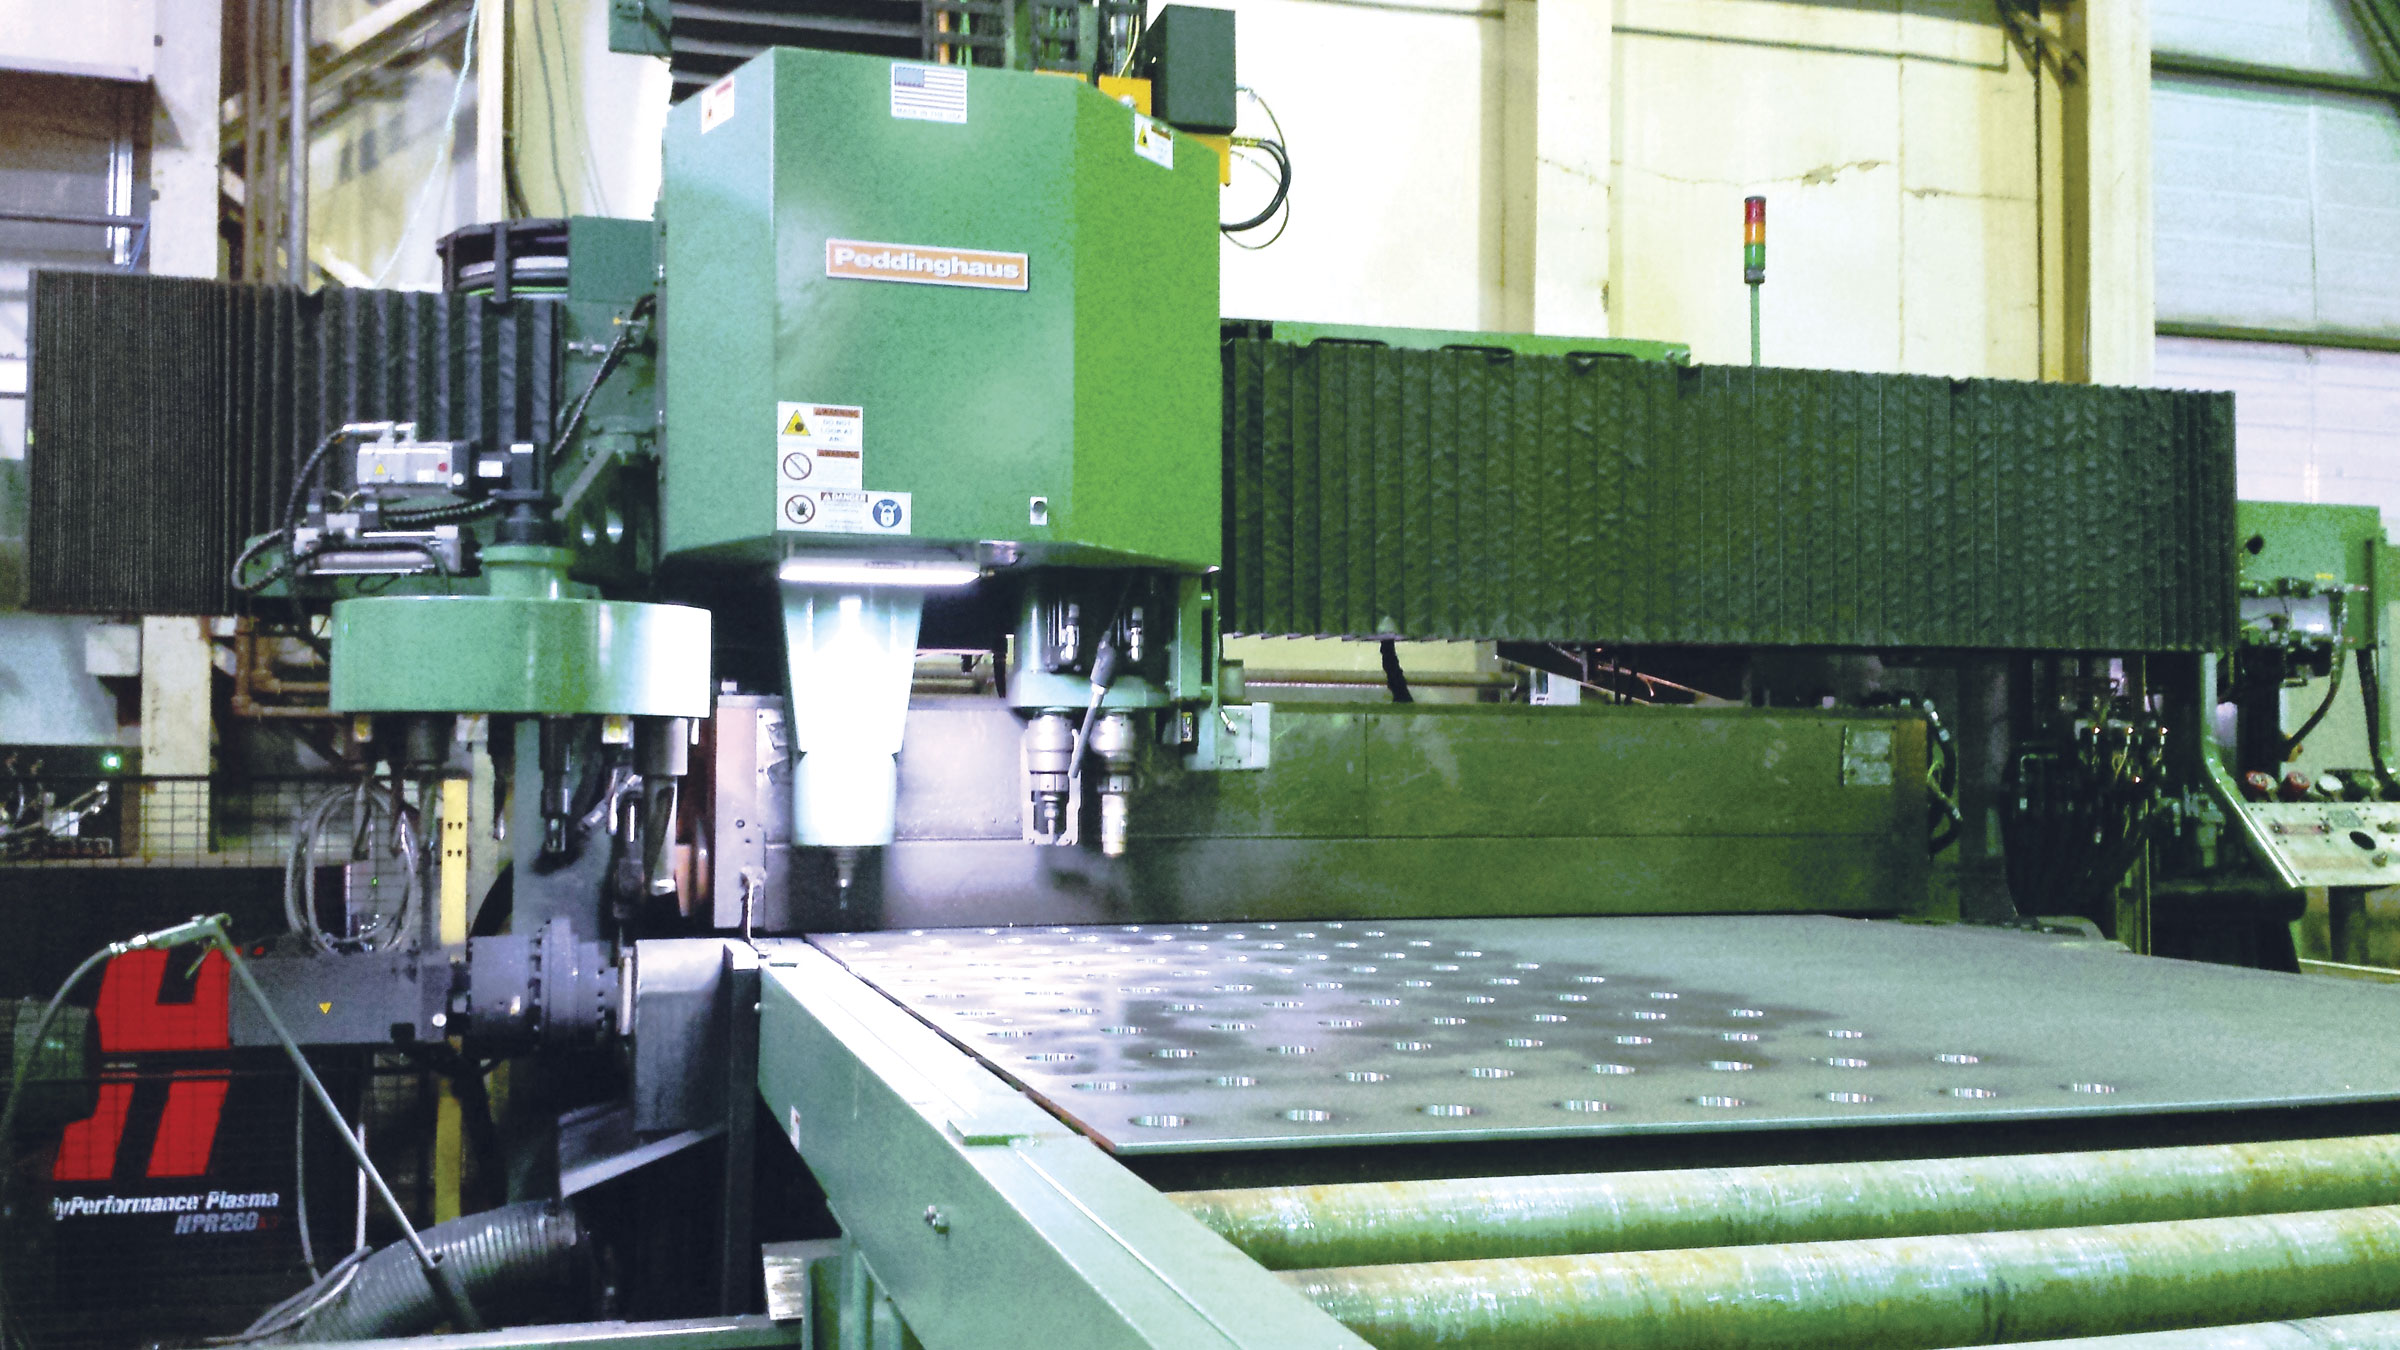 The Peddinghaus plate processing machine in Ocean Steel & Construction's shop handles plate stock up to 76 mm (3 in.) thick in sizes 2400 mm (96 in.) wide by 6000 mm (240 in.) long.